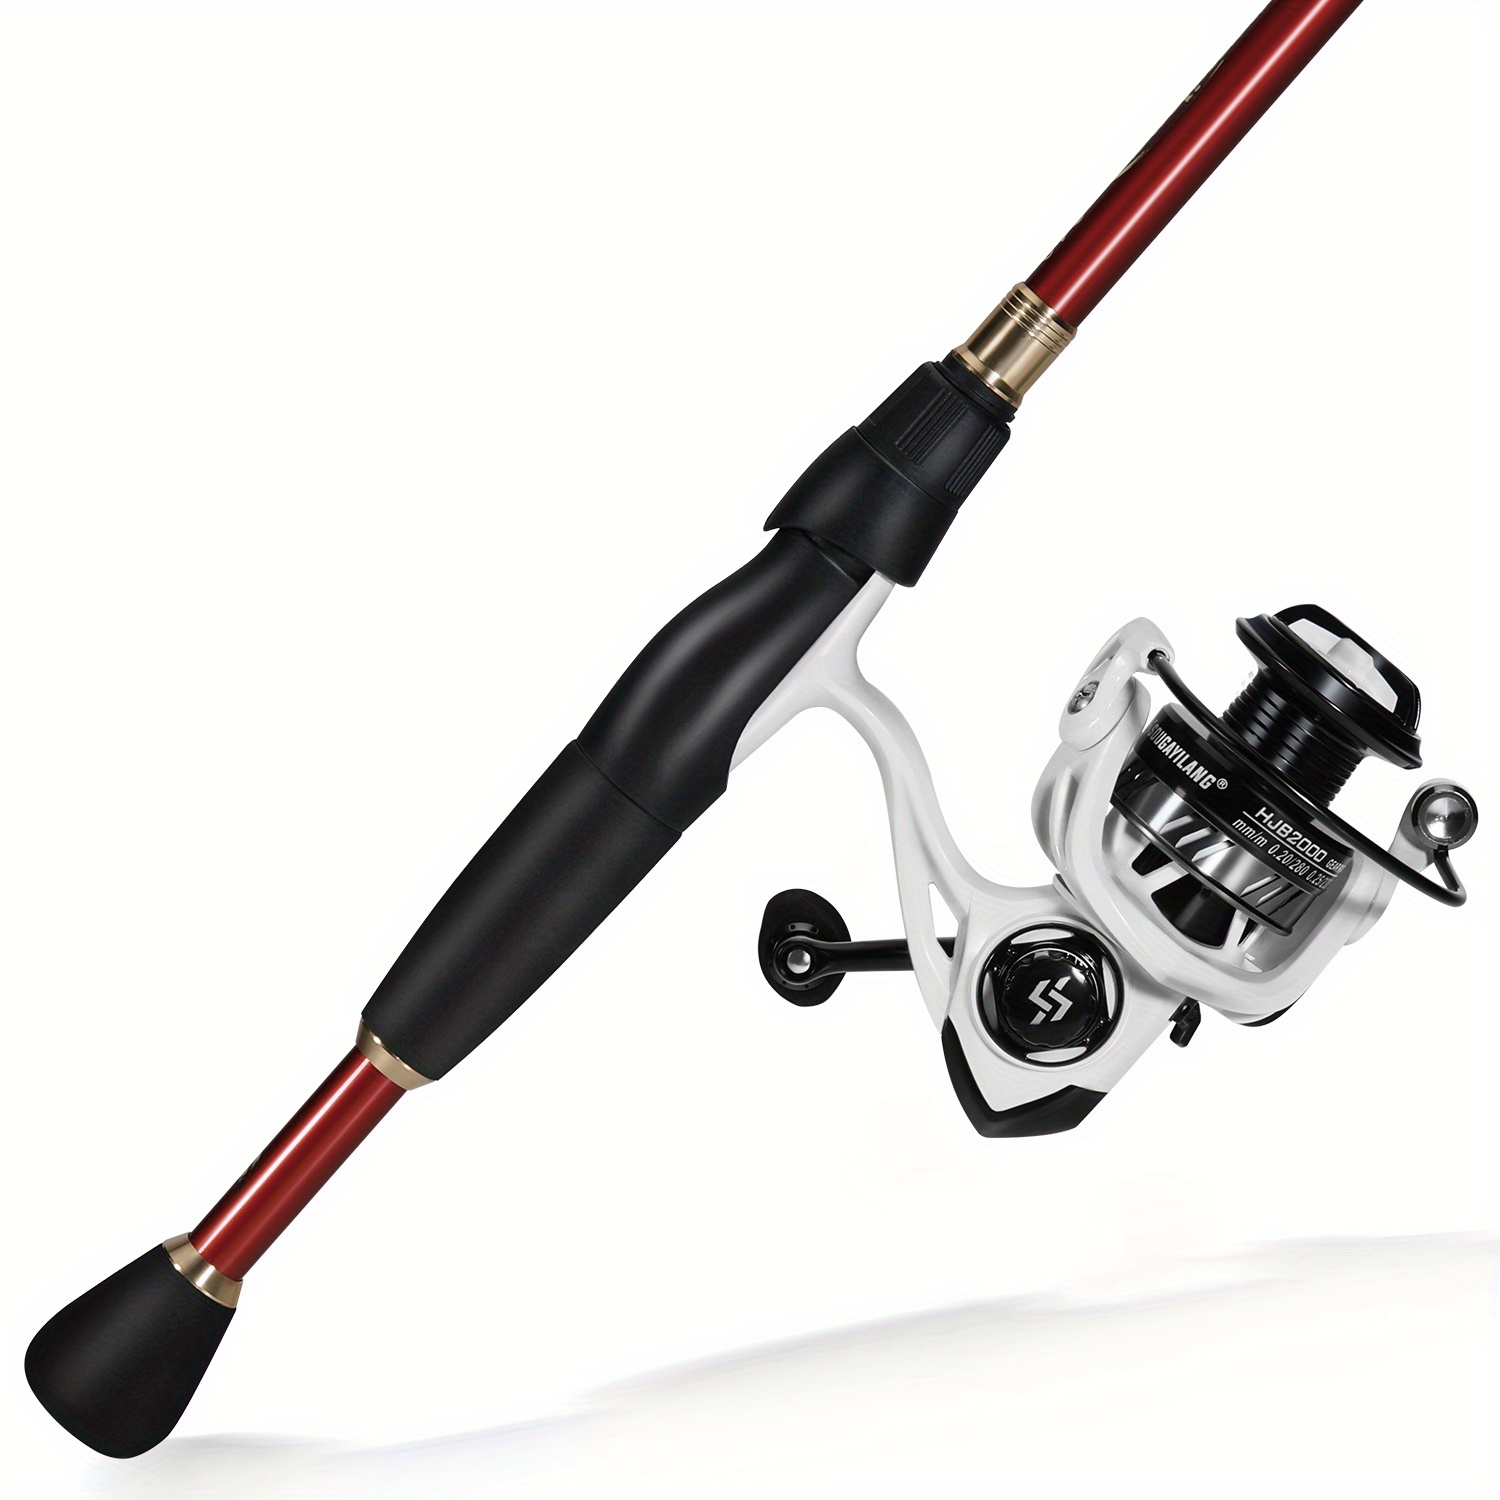 Cheap Fishing Rod and Reel Outdoor 1.4m Telescopic Carbon Fiber Fishing Rod  and Closed Fishing Reel Combo